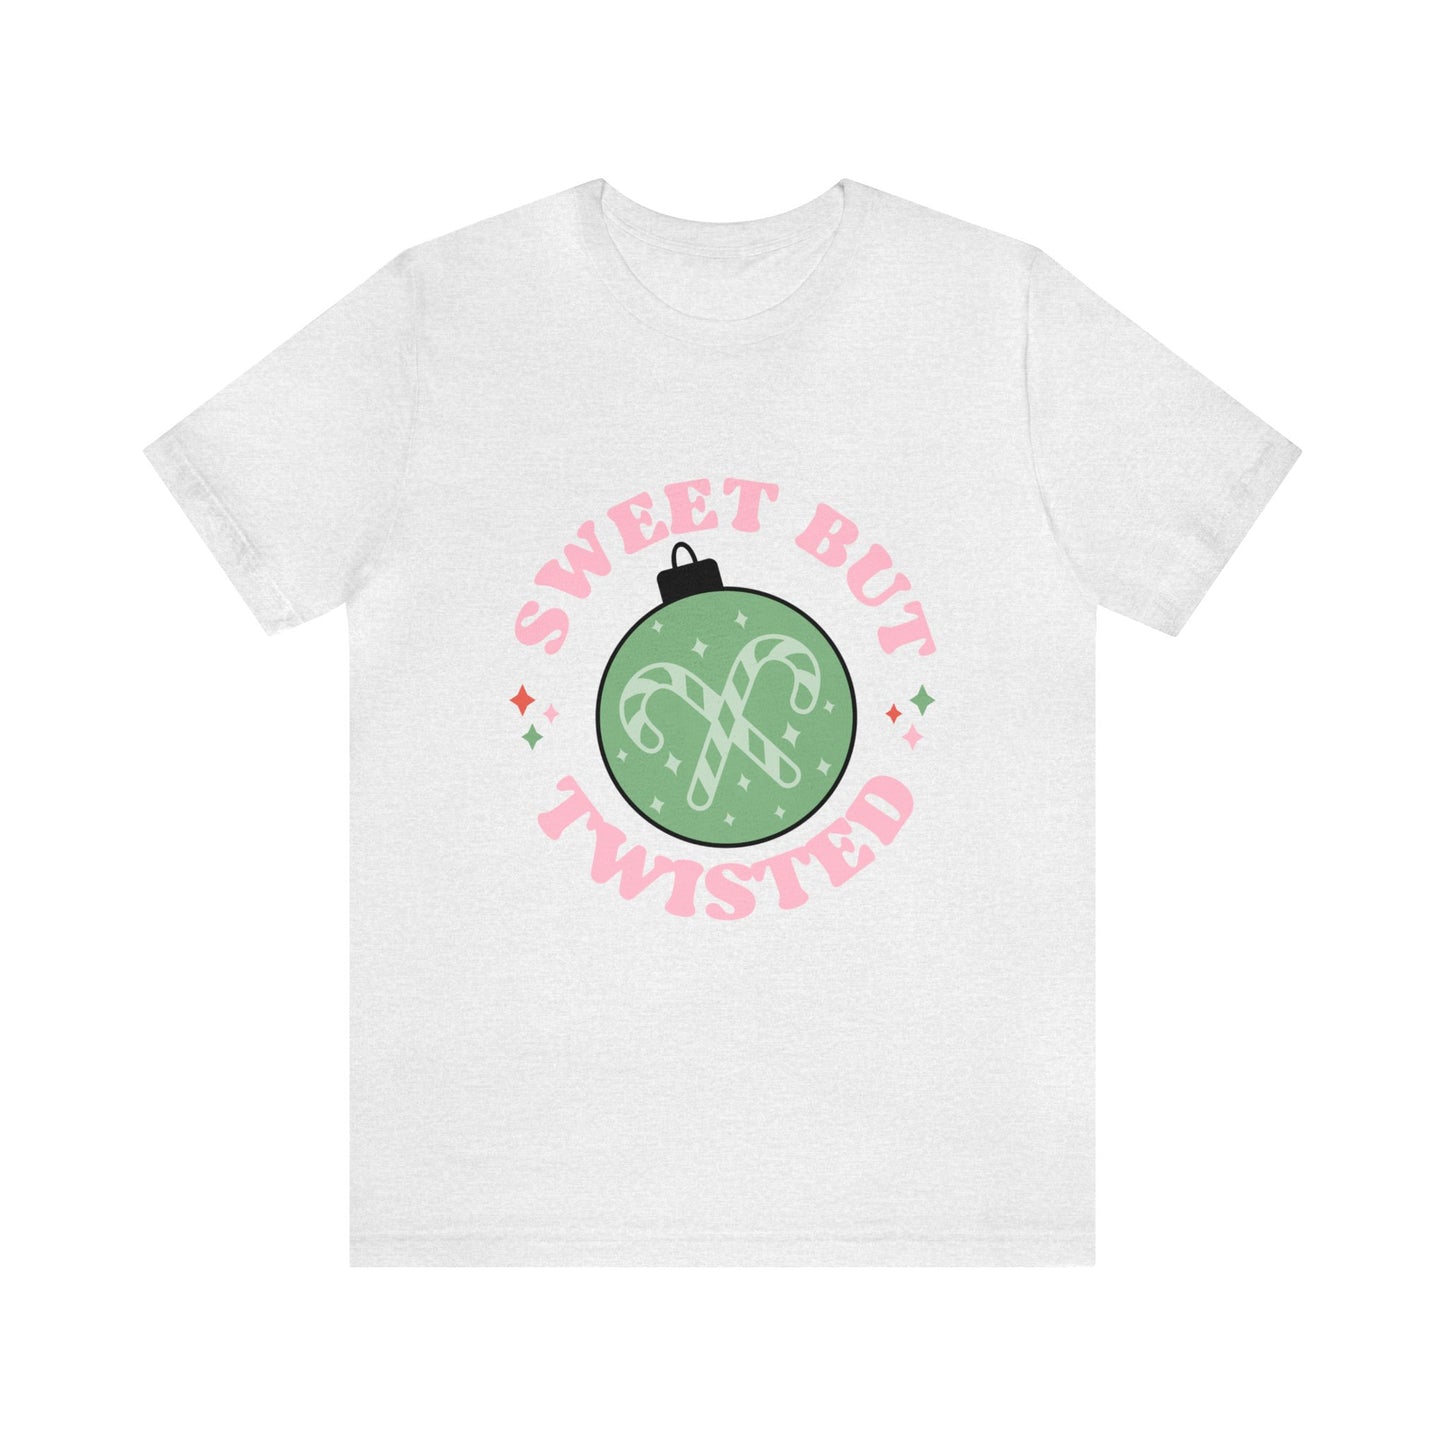 Sweet But Twisted Ornament Women's Short Sleeve Christmas T Shirt